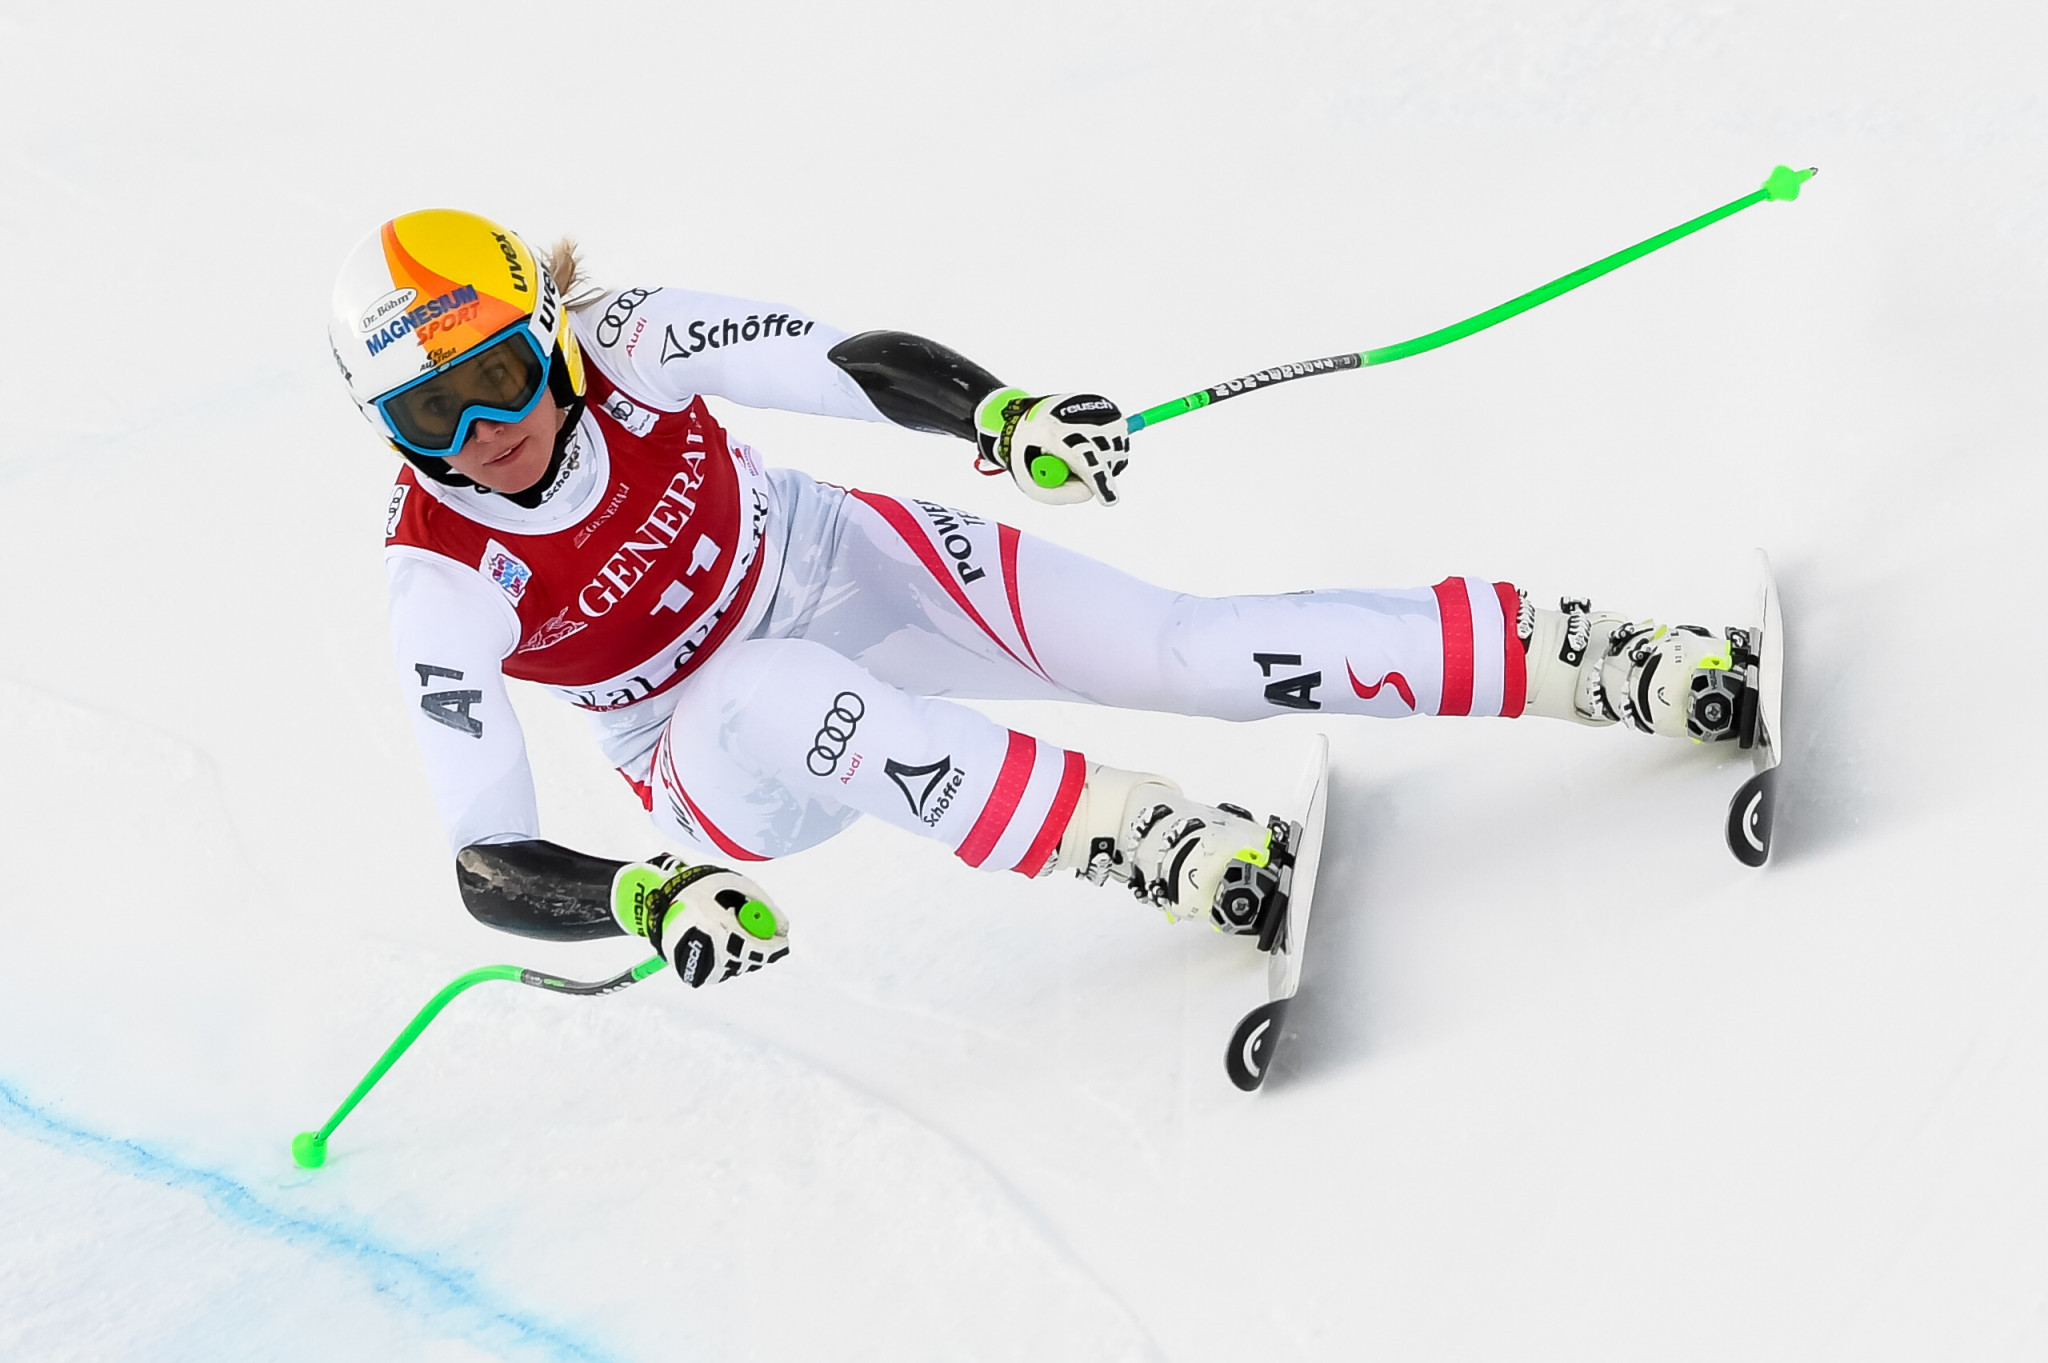 Cornelia Hütter will be looking to follow up her earlier victory in Lake Louise by taking gold on home snow in Bad Kleinkirchheim ©Getty Images